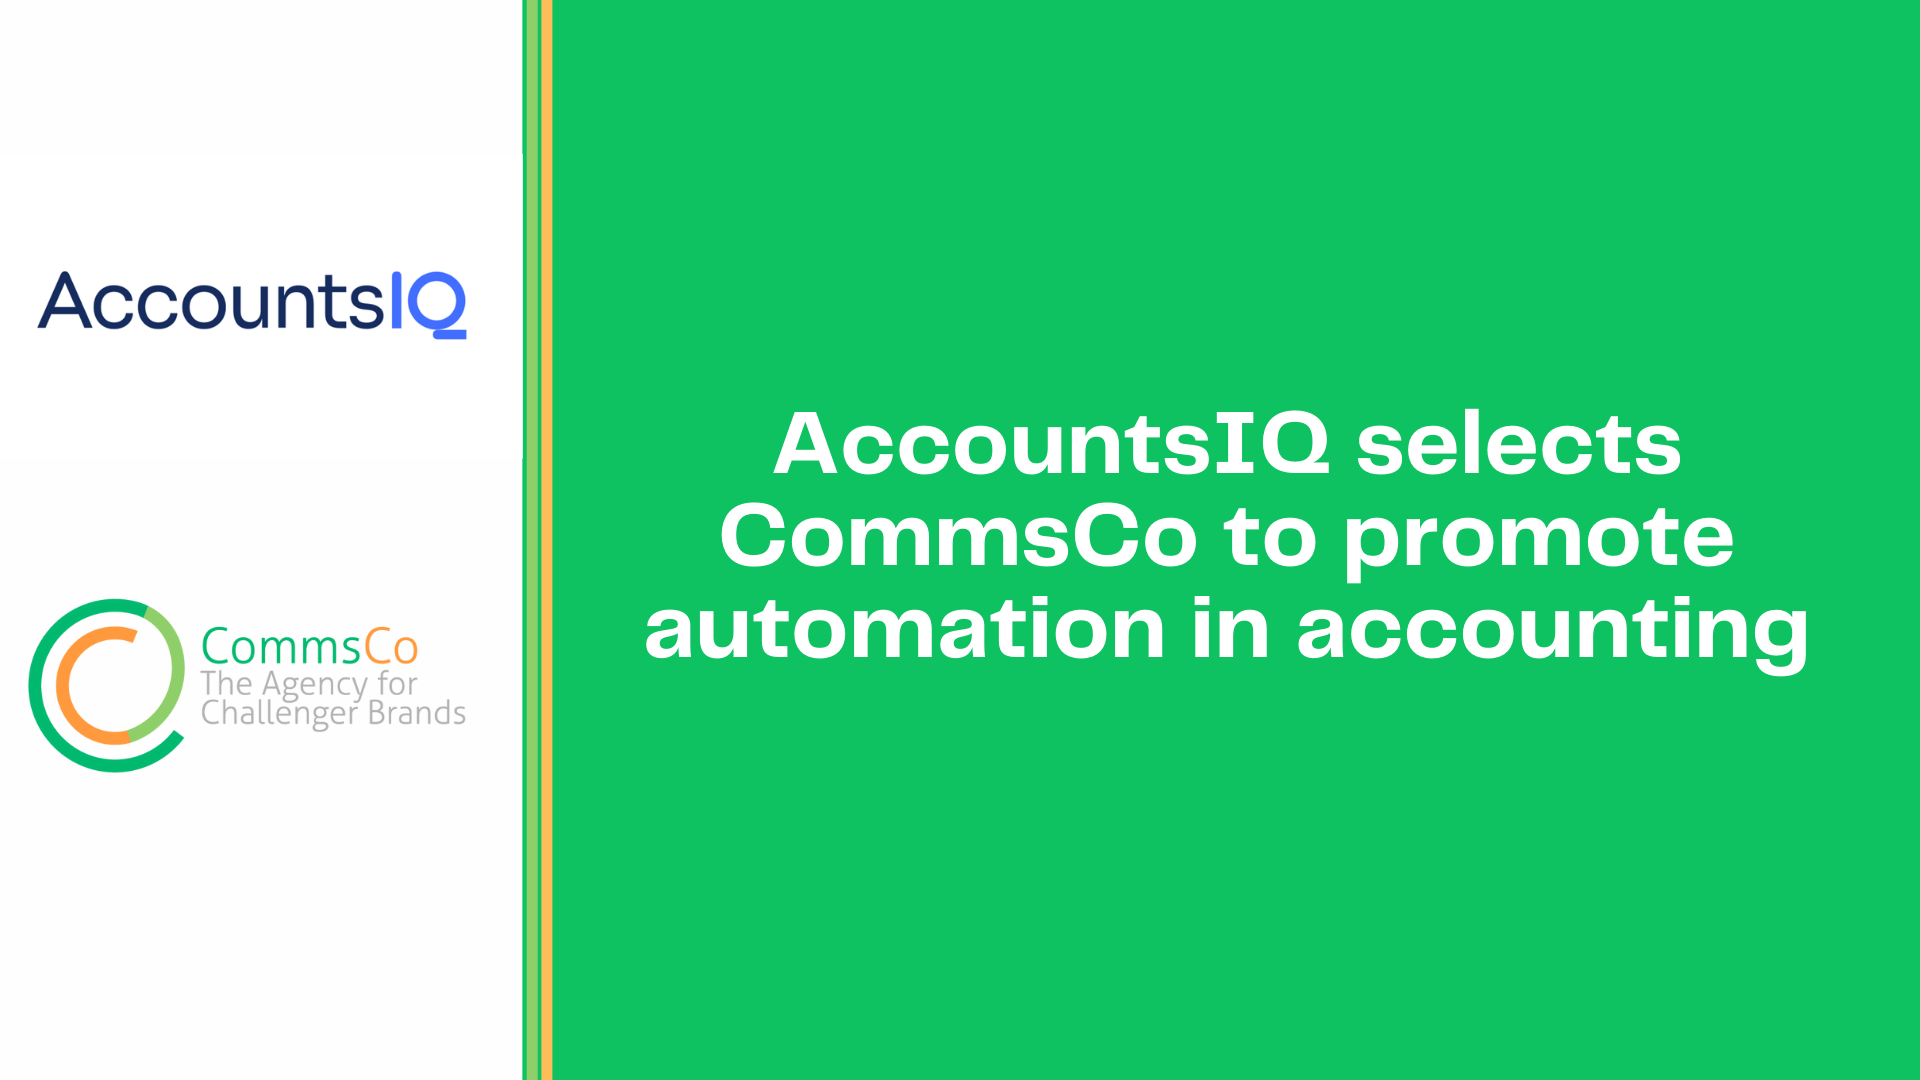 AccountsIQ selects CommsCo to promote automation in accounting